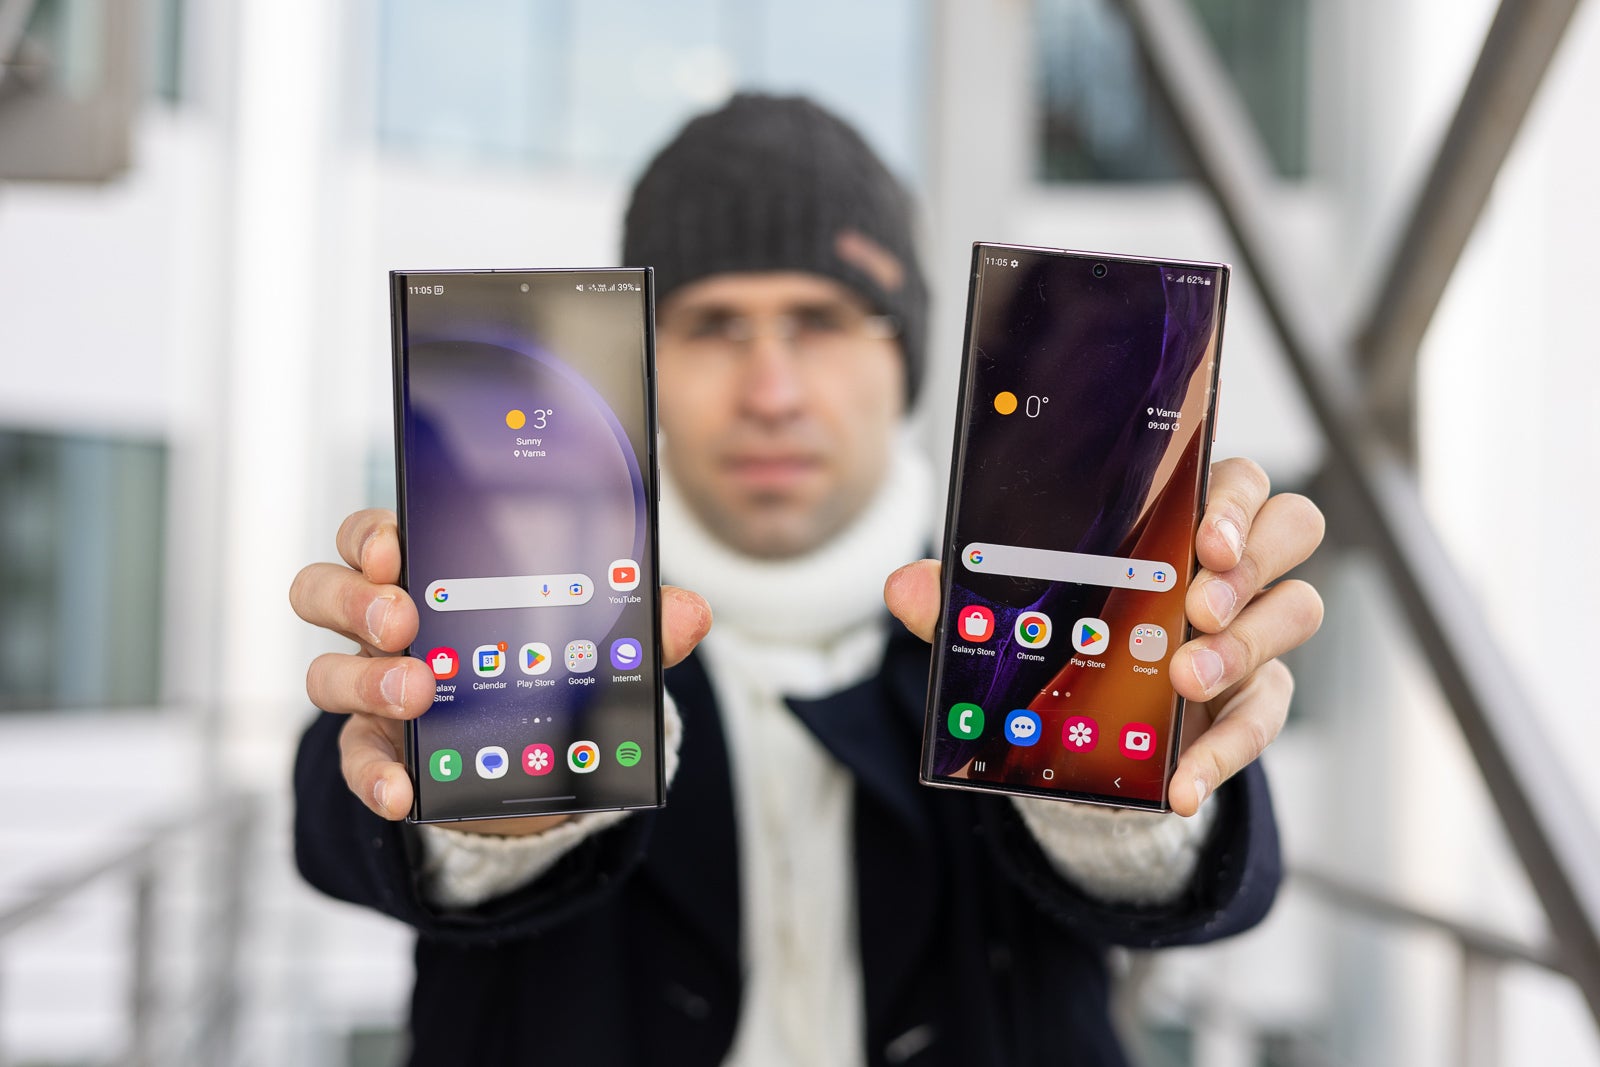 (Image Credit - PhoneArena) A few smaller improvements make the screen better on the new model - Samsung Galaxy S23 Ultra vs Note 20 Ultra: Should you upgrade?